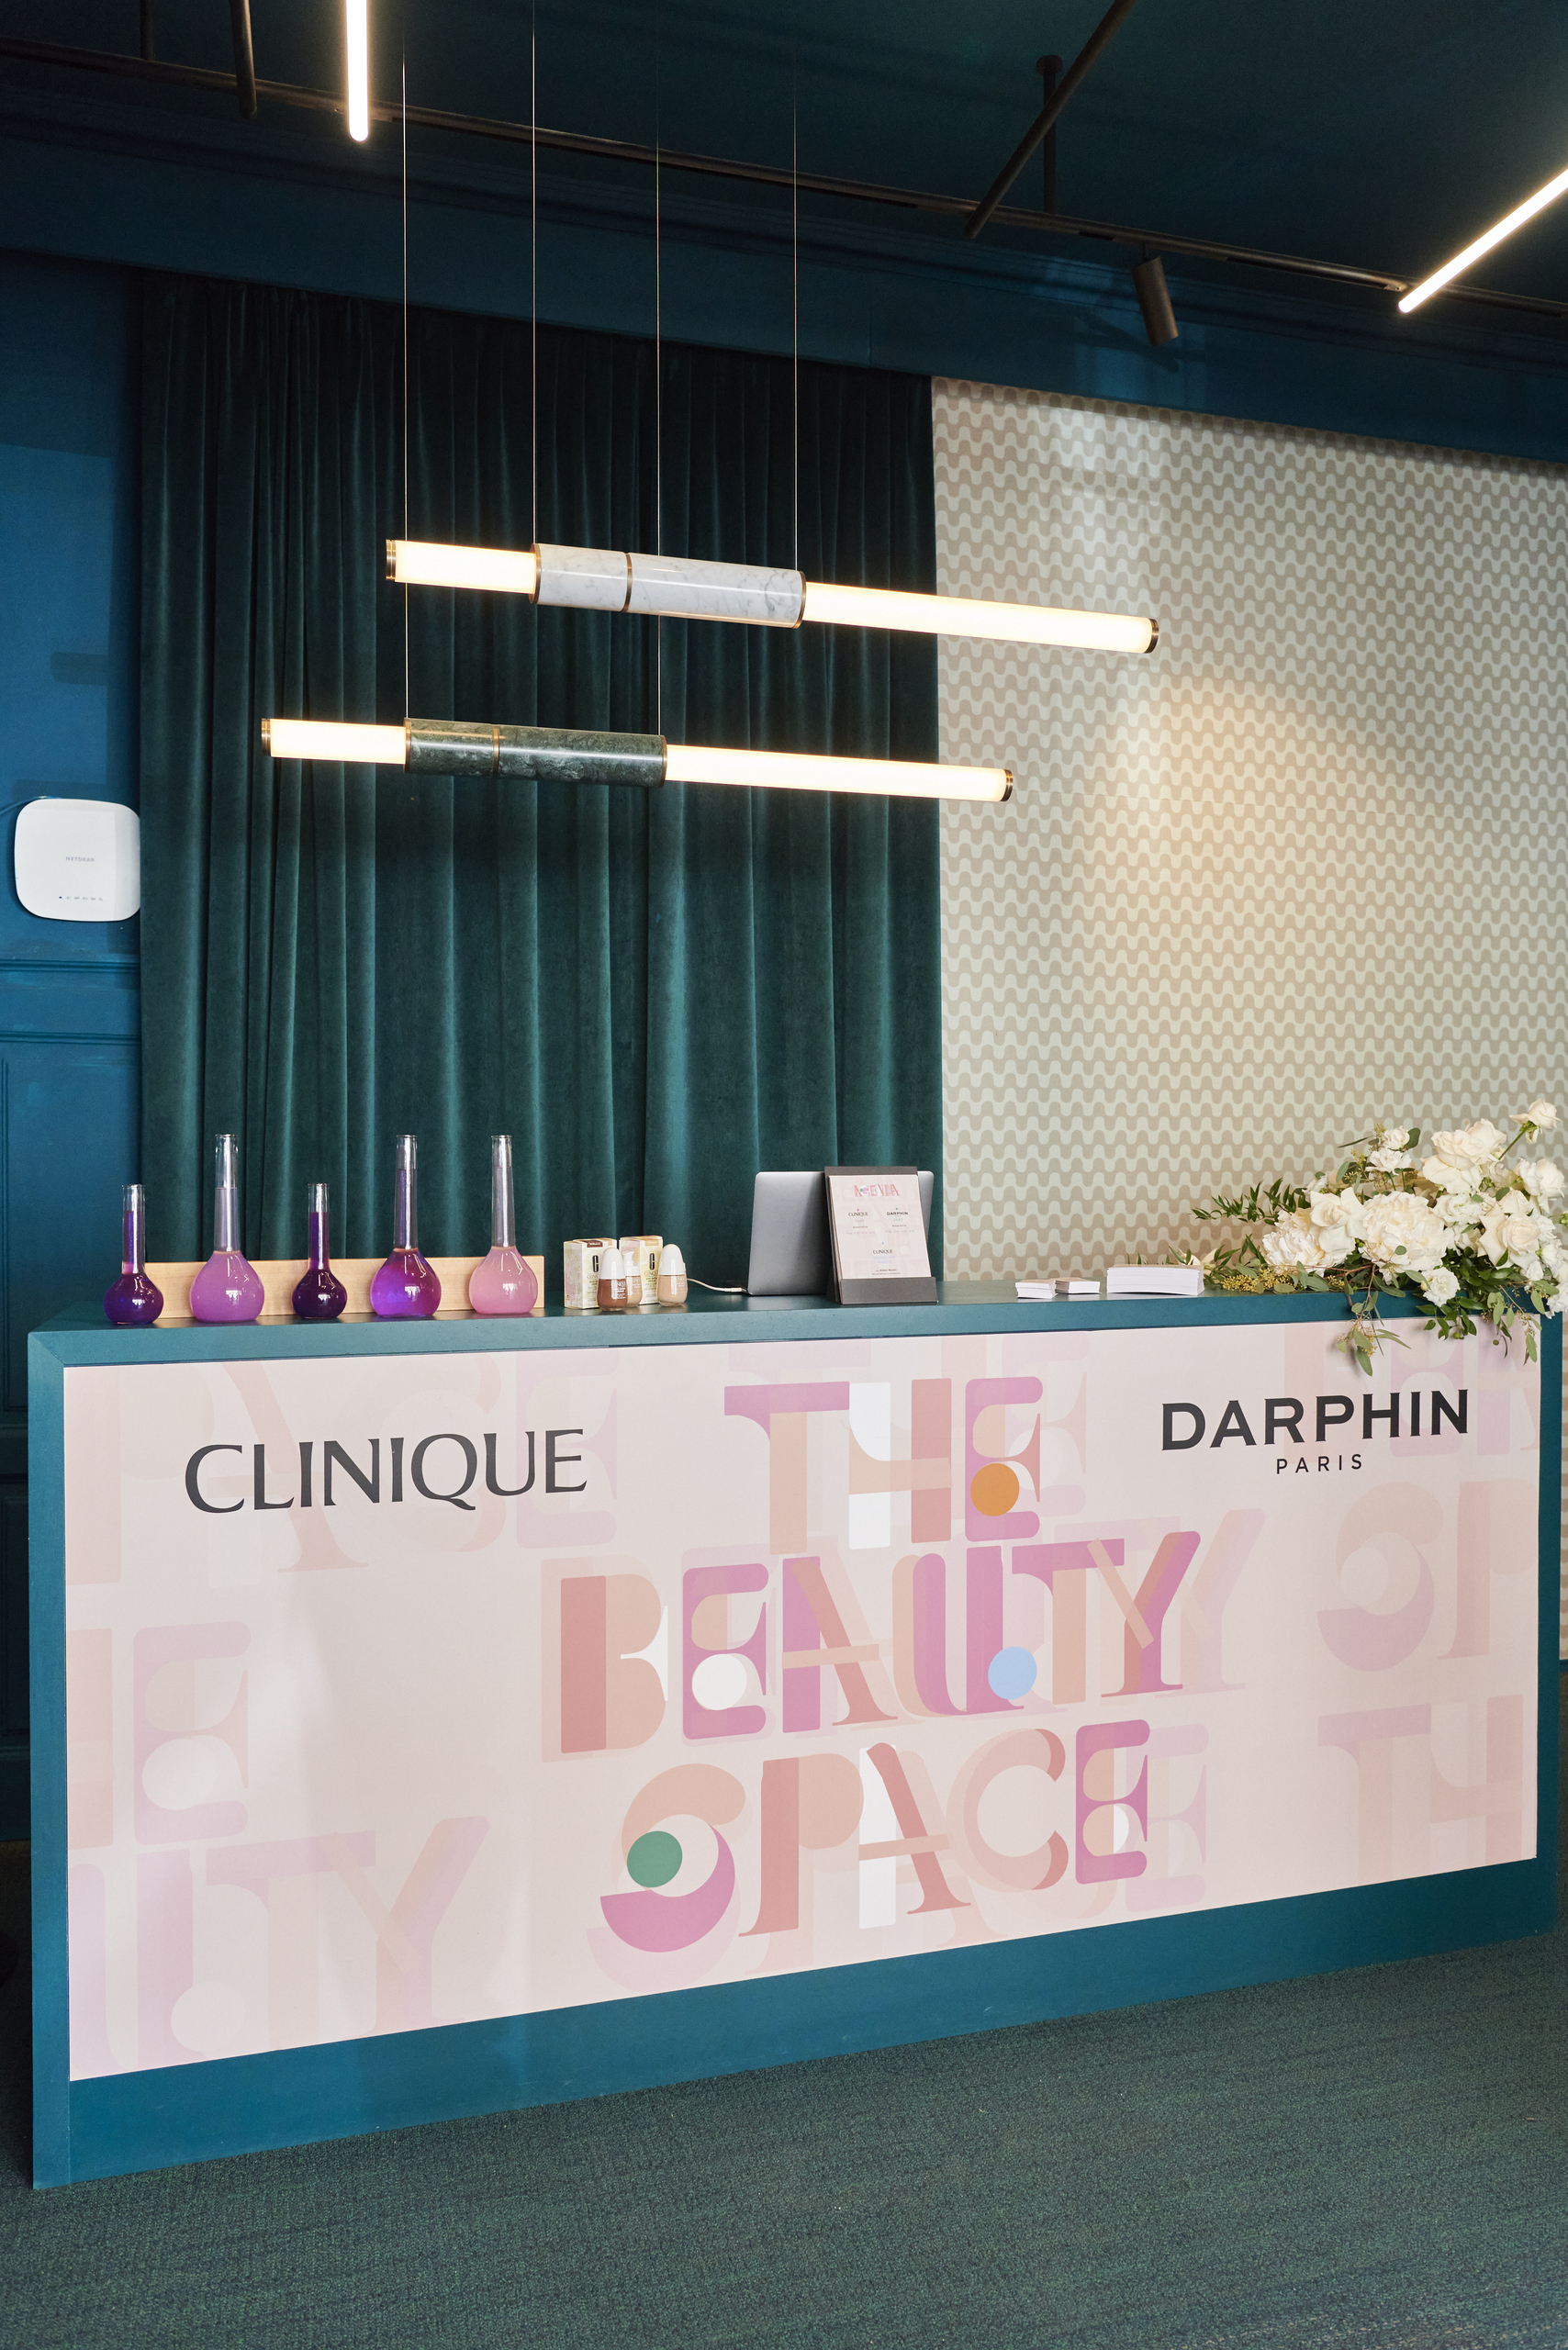 The Beauty Space: creativity and beauty for the Clinique and